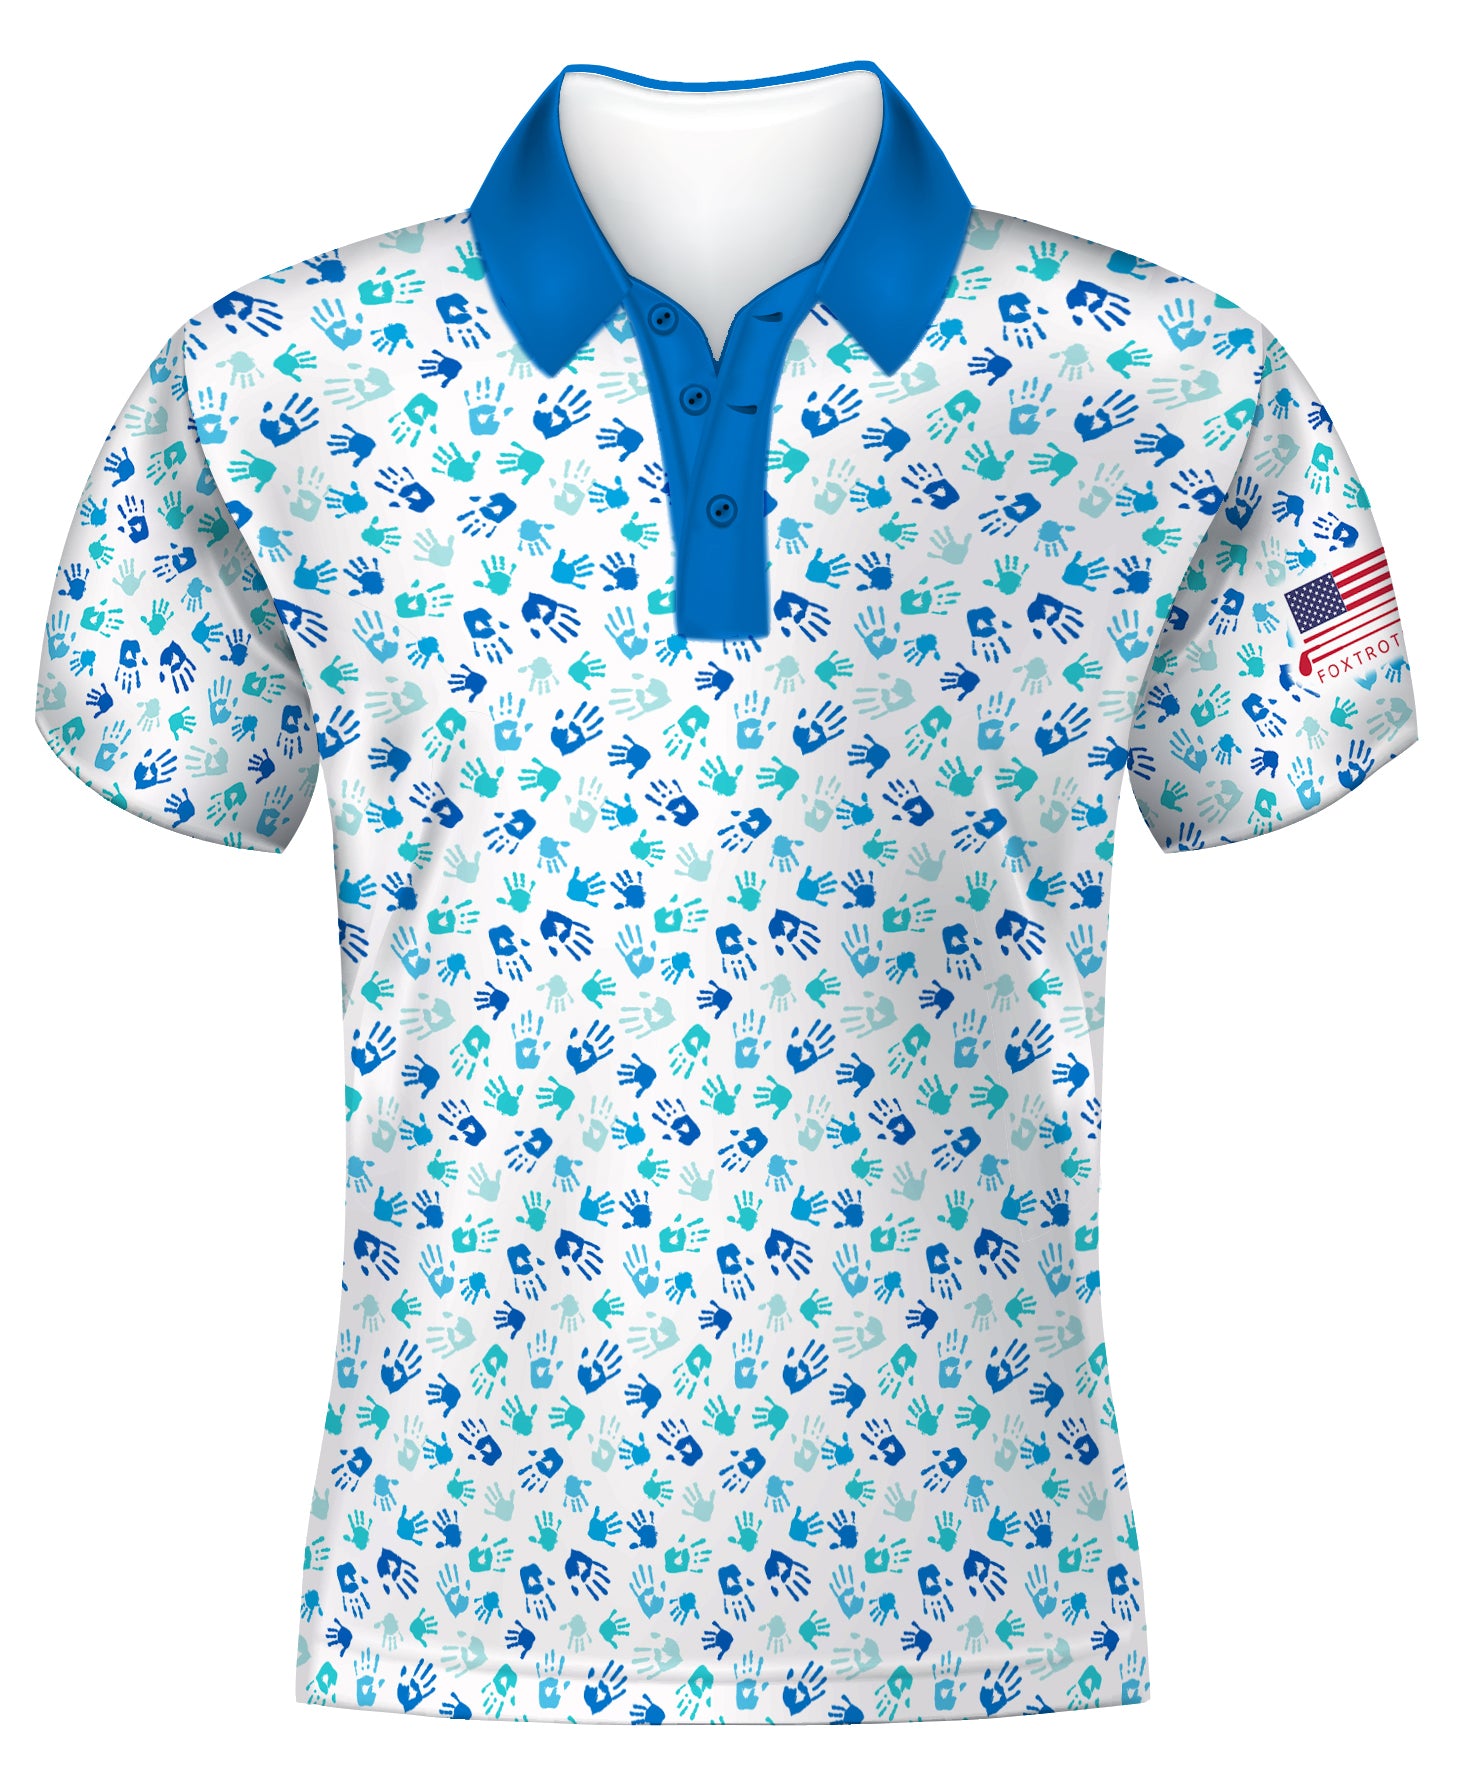 PRE ORDER FATHER'S DAY POLO - MADE IN U.S.A.